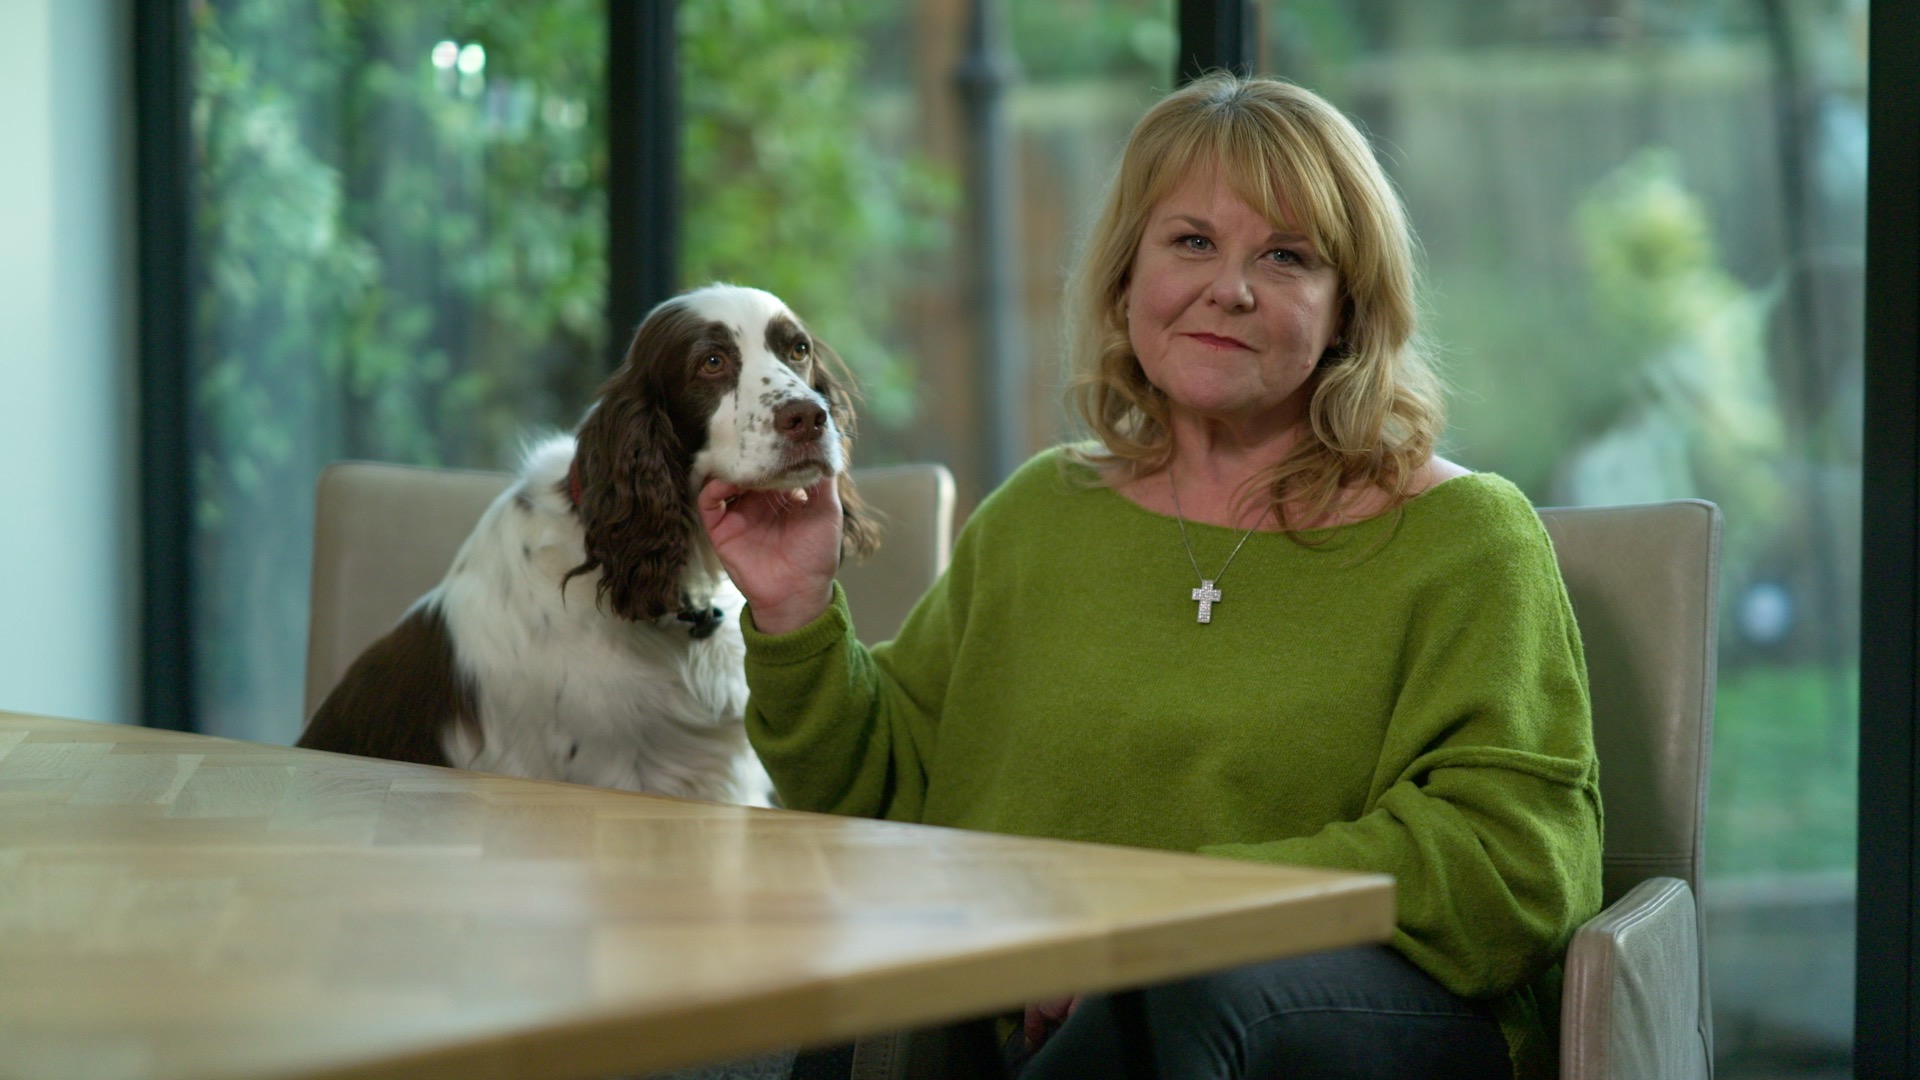 Wendi Peters presents for BBC Lifeline, sitting at a table at home with her pet brown and white springer spaniel on a chair next to her.